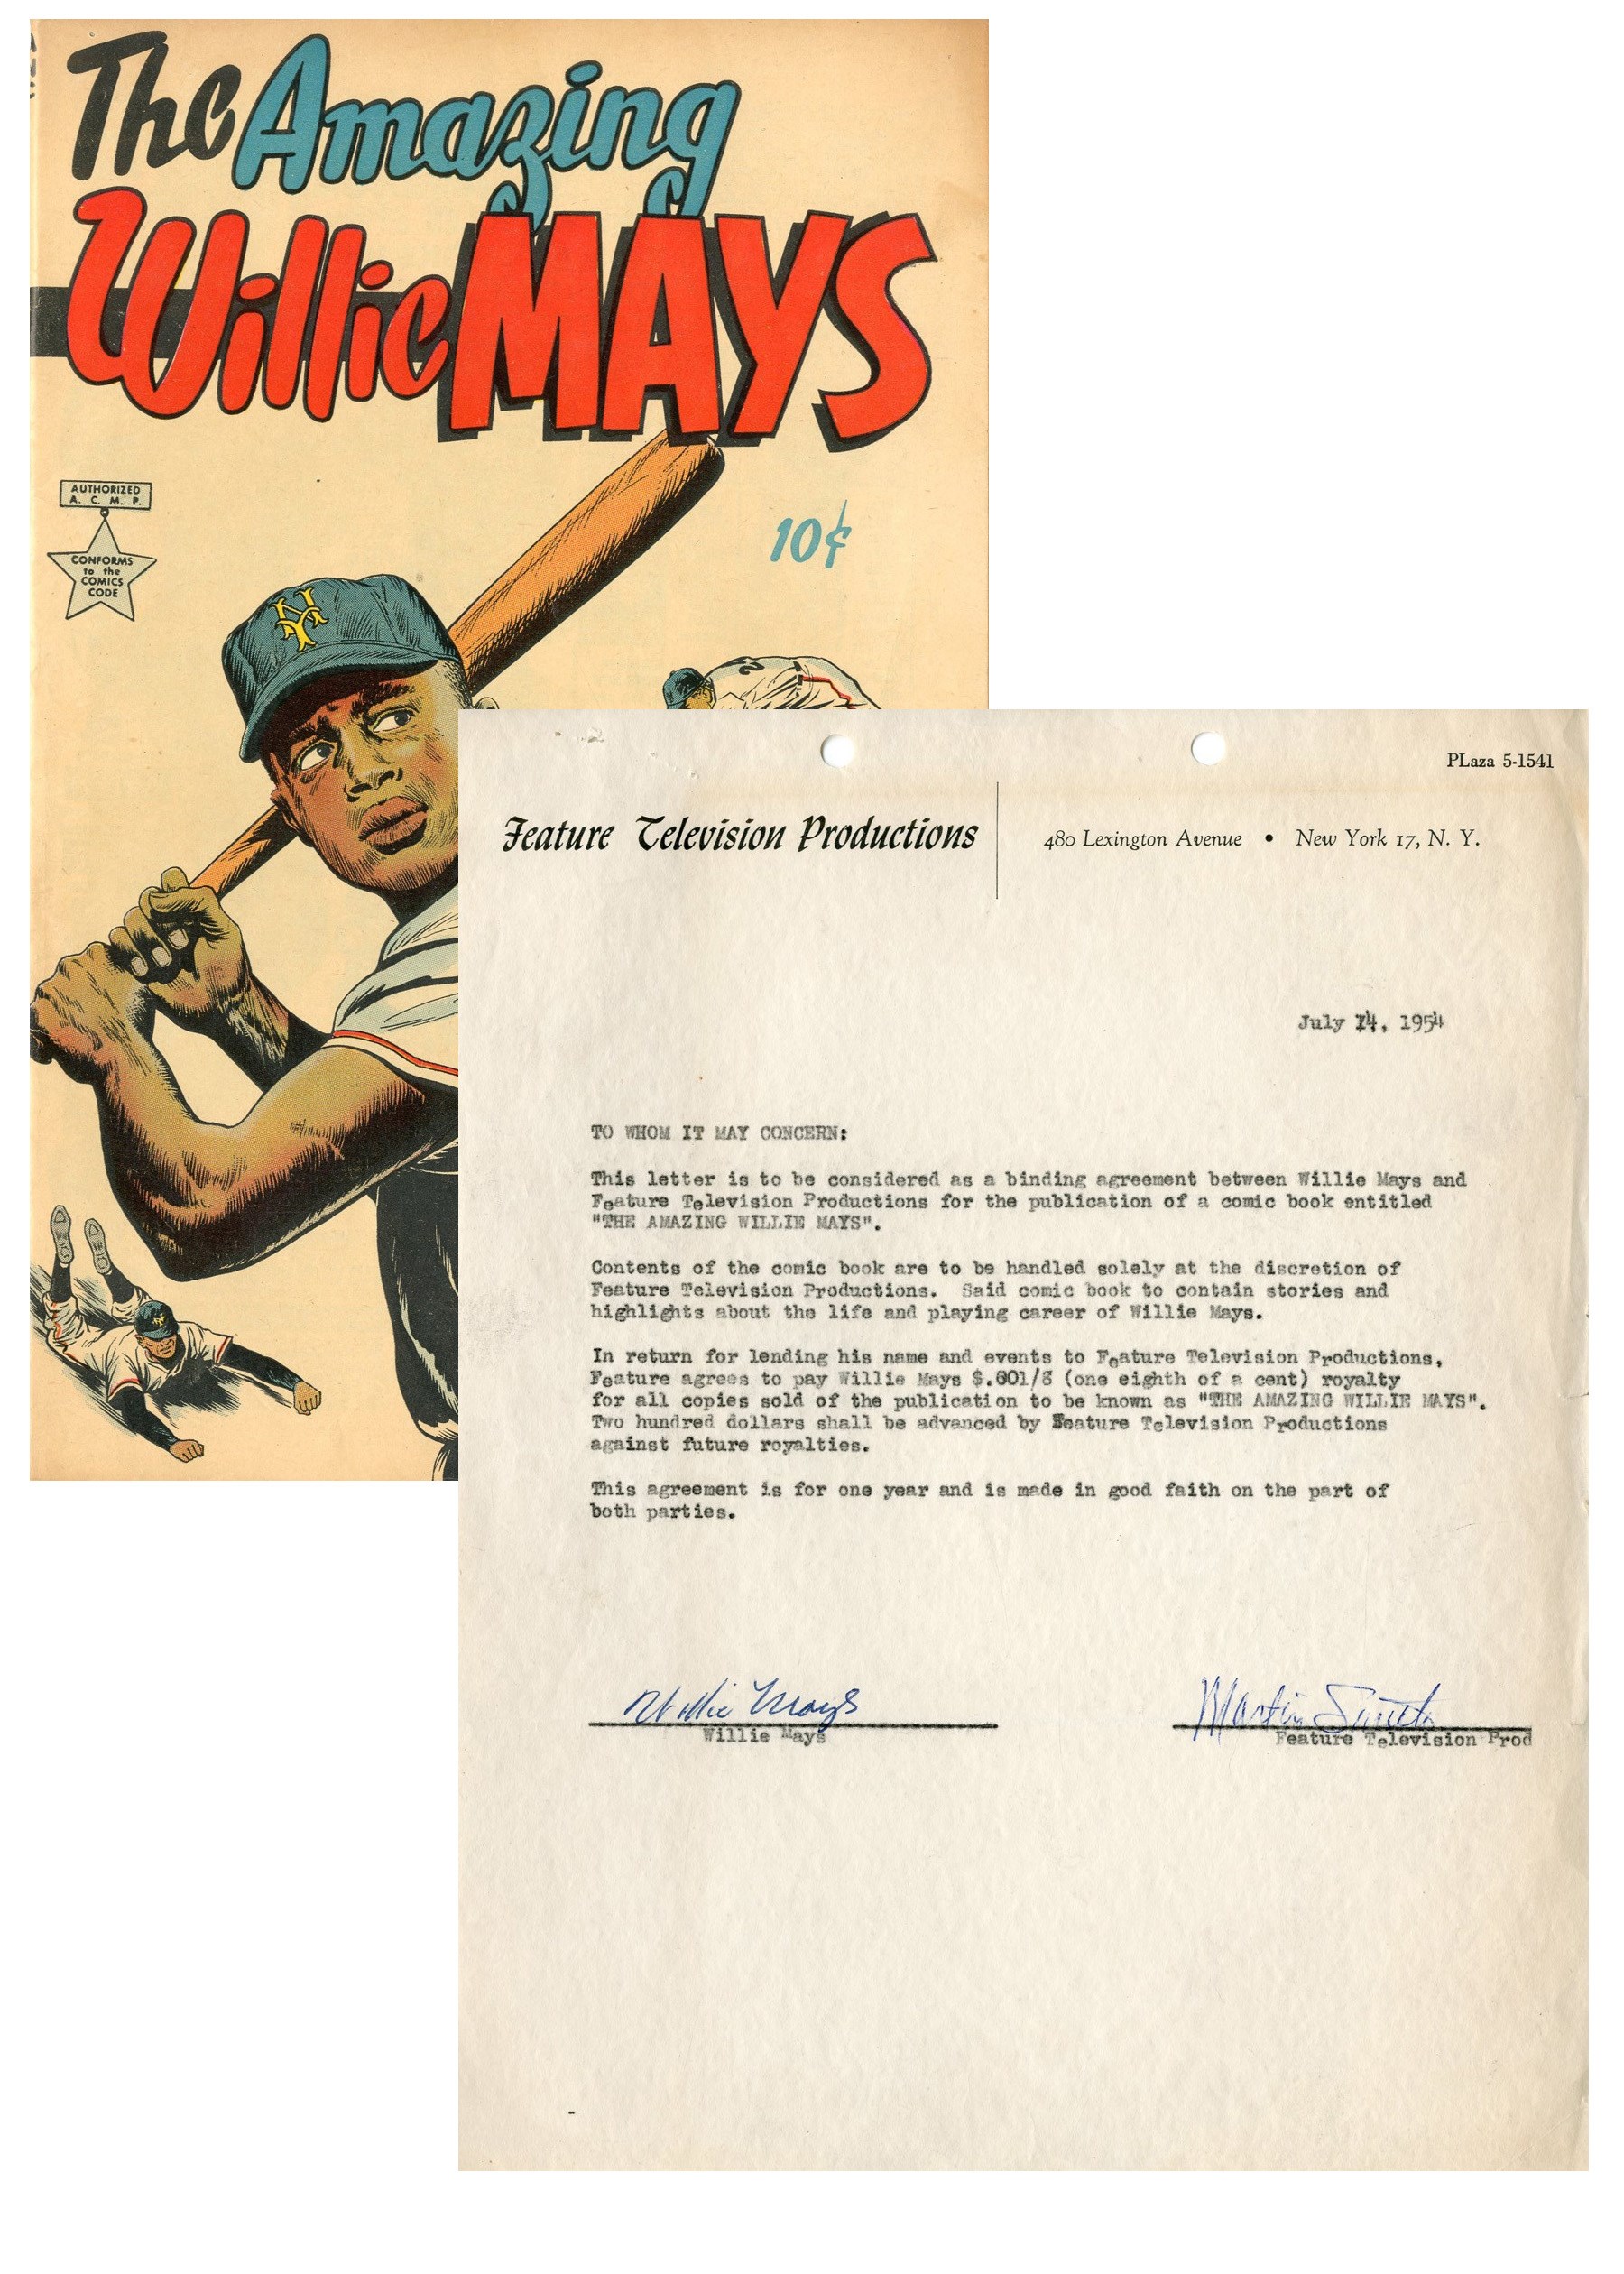 NY Yankees, Giants & Mets - 1954 Willie Mays Signed "The Amazing Willie Mays" Comic Book Contract (PSA)